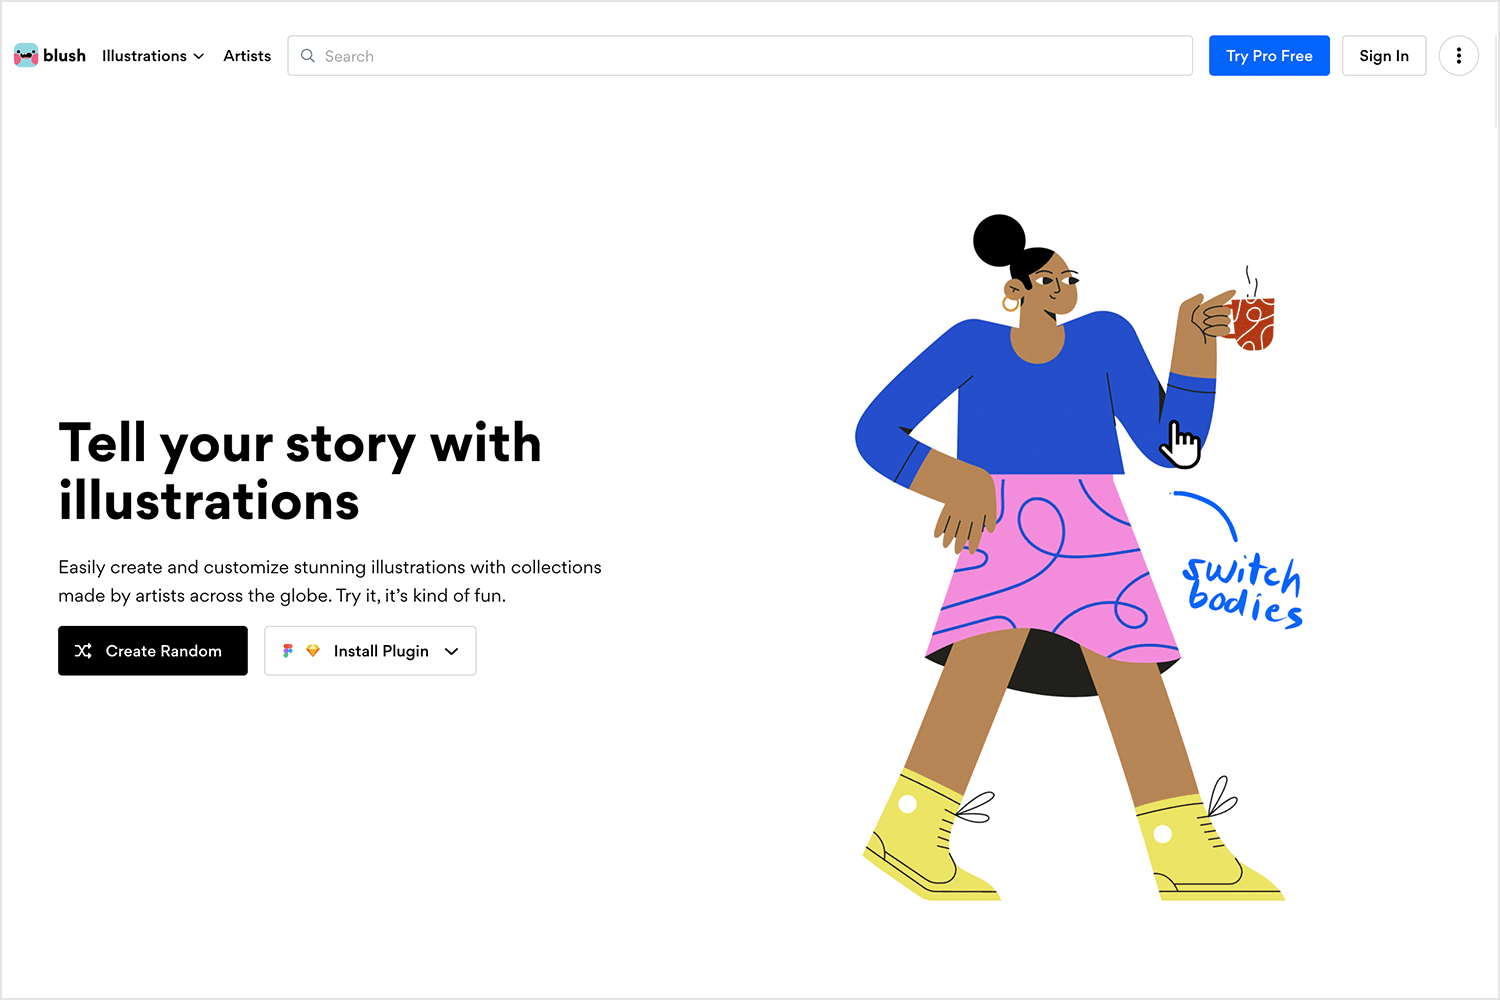 Blush homepage featuring customizable illustrations by artists worldwide